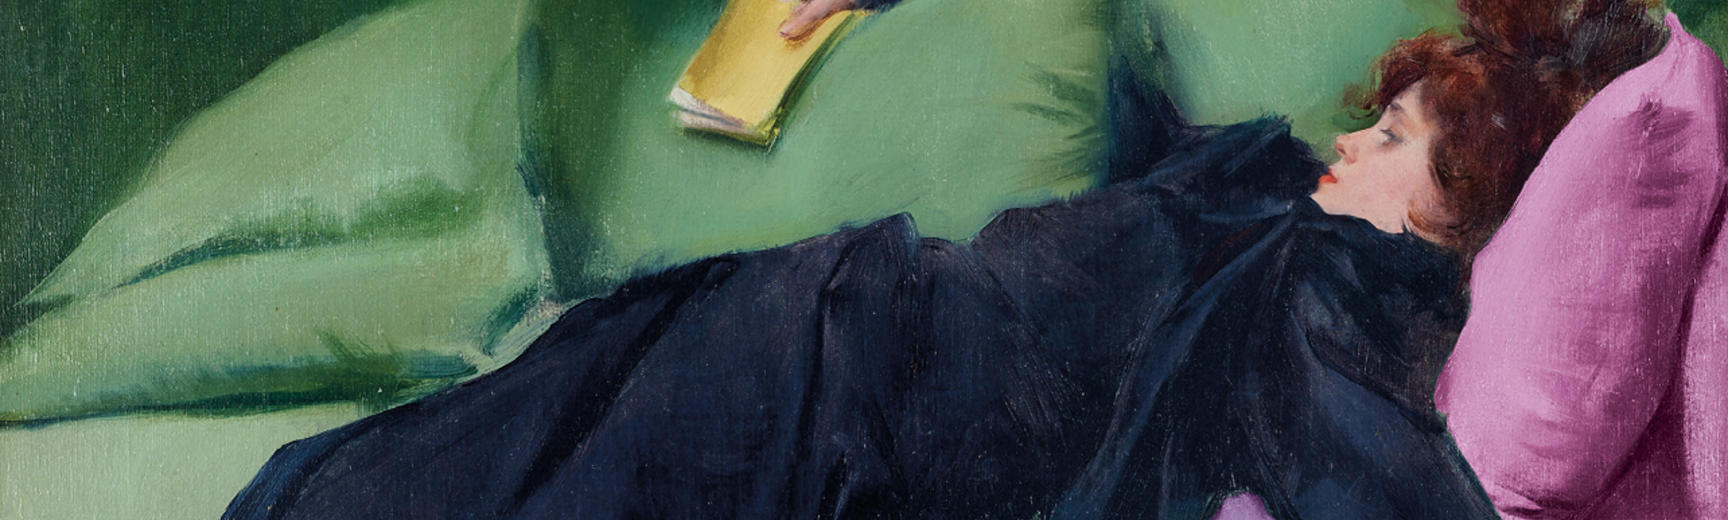 Marketing image for Colour Revolution exhibition showing colour stripes over the lady relaxing on a green chaise lounge